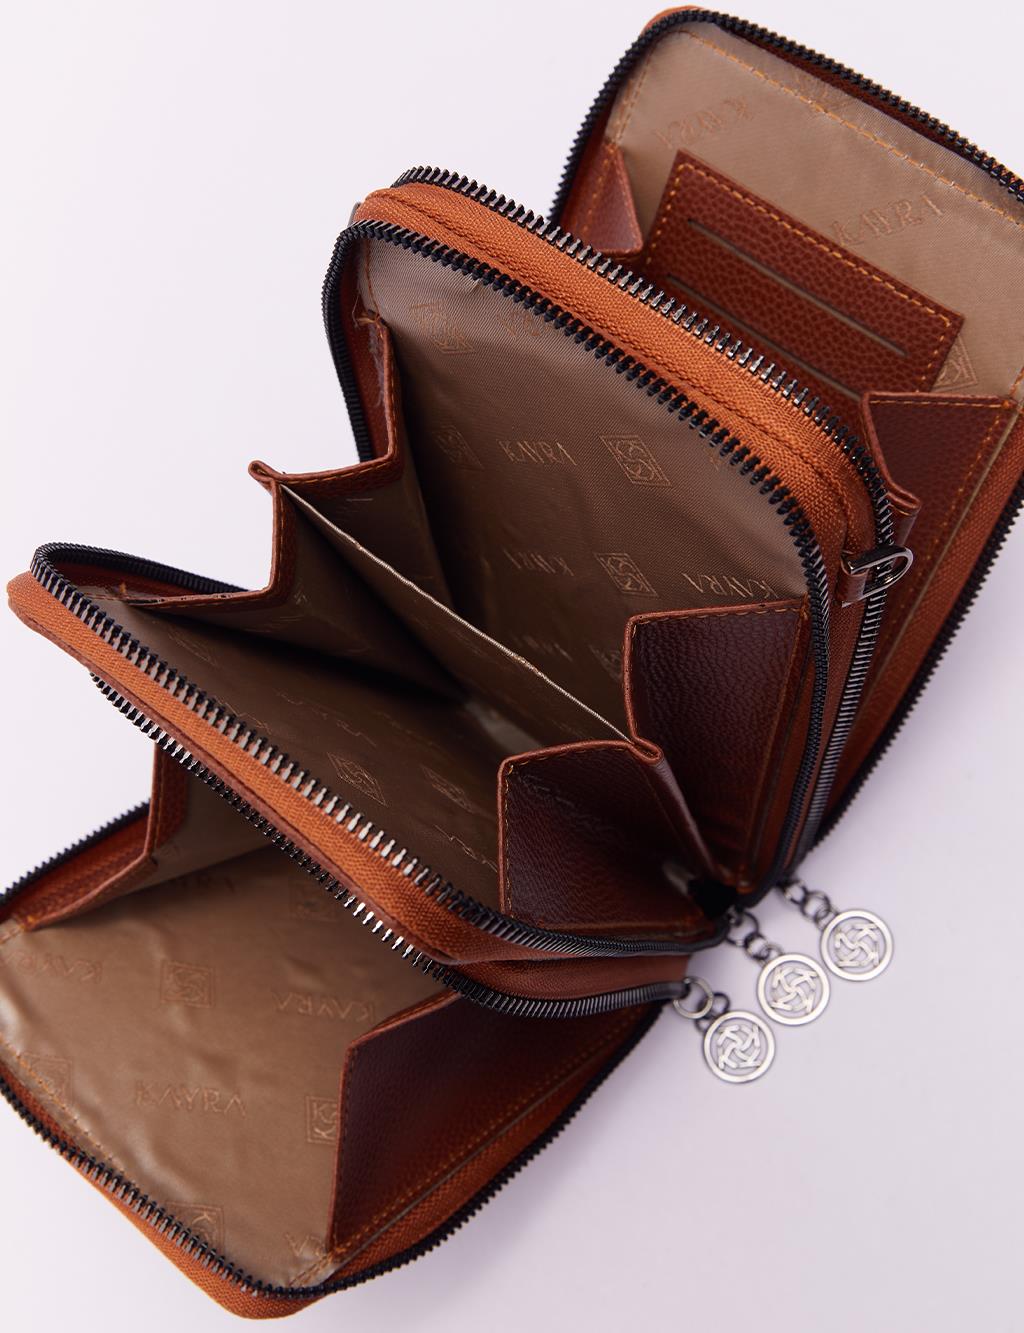 Three Compartment Natural Leather Wallet Bag Tobacco